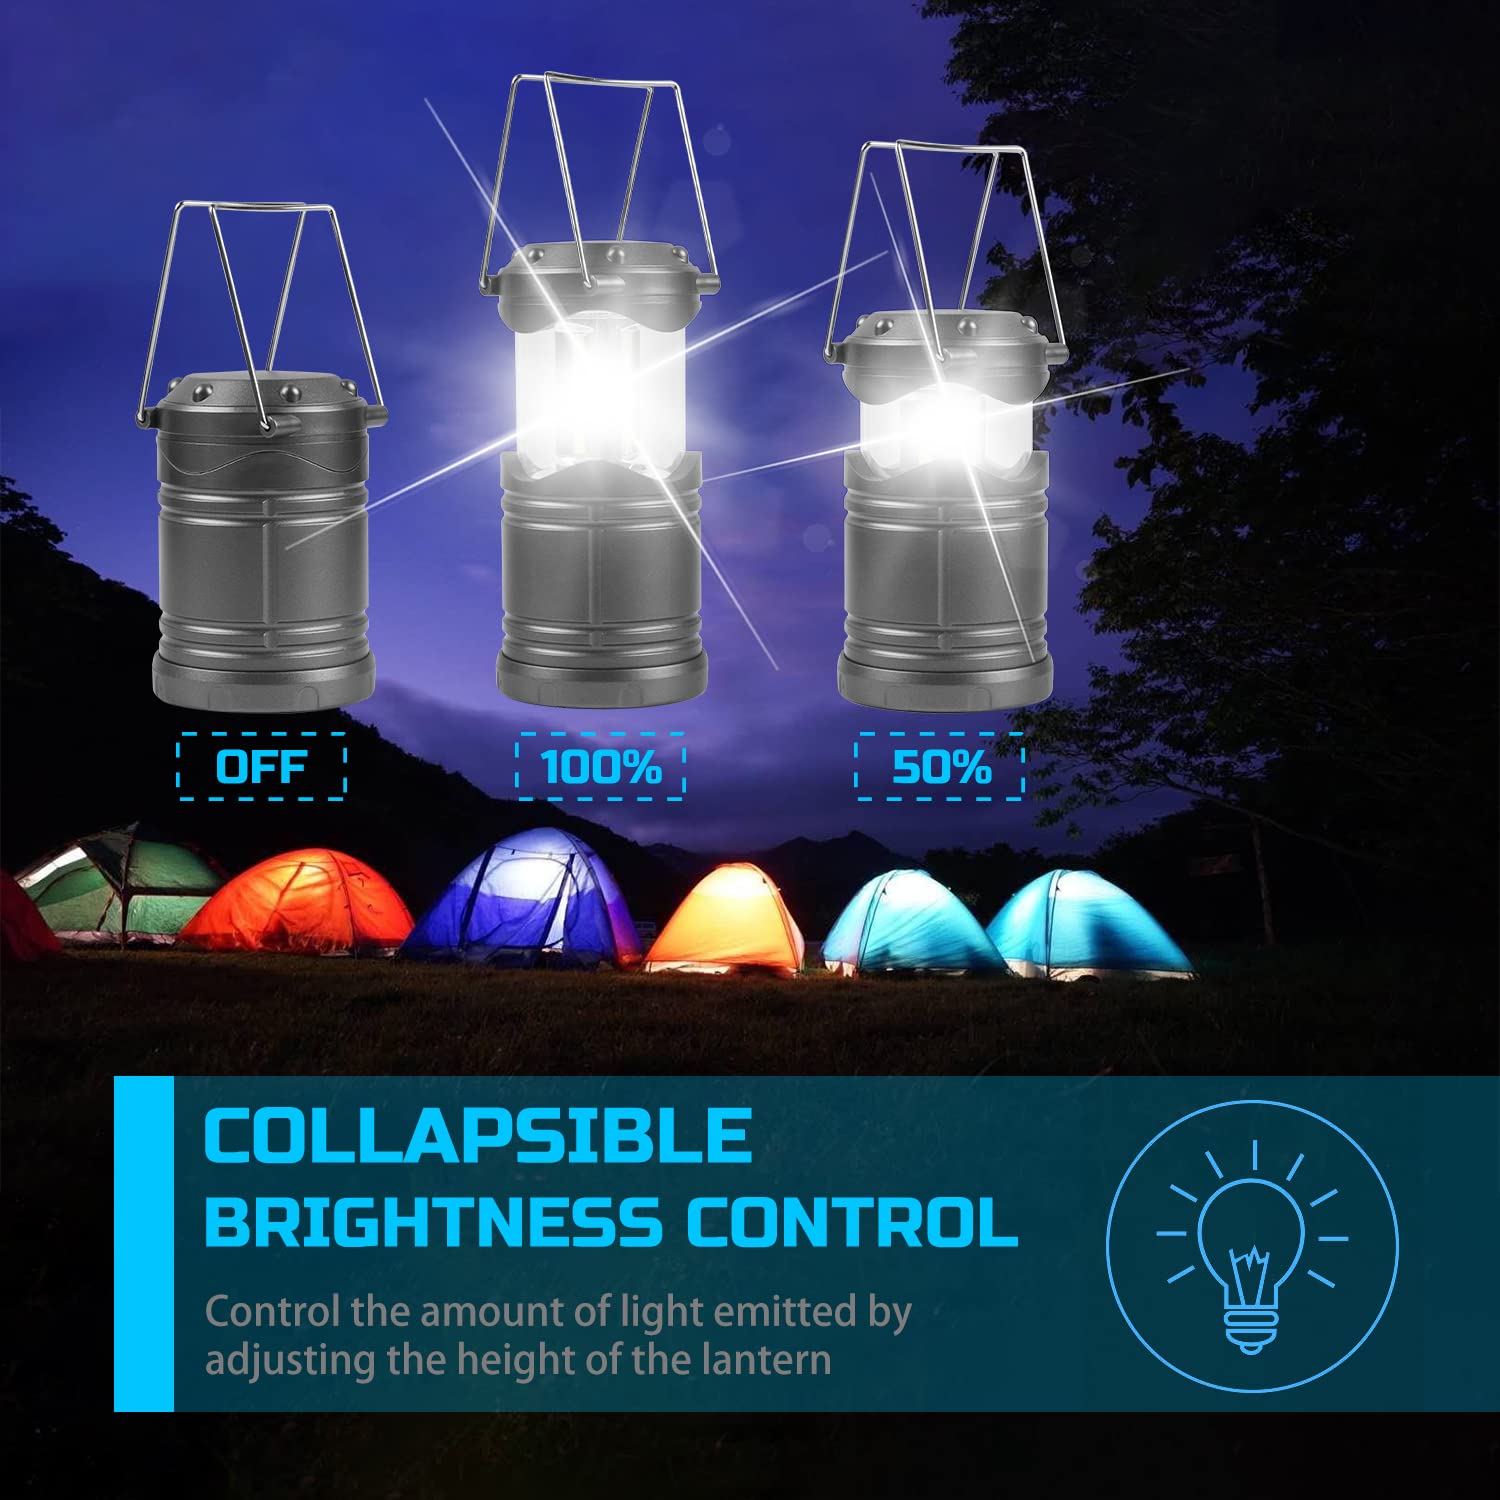 Lichamp LED Lanterns, 4 Pack Pop Up Lanterns for Power Outages, Bright Battery Powered Hanging Lanterns for Outdoor Camping Hiking, Emergency Survival Lights for Hurricane Collapsible, Dark Gray